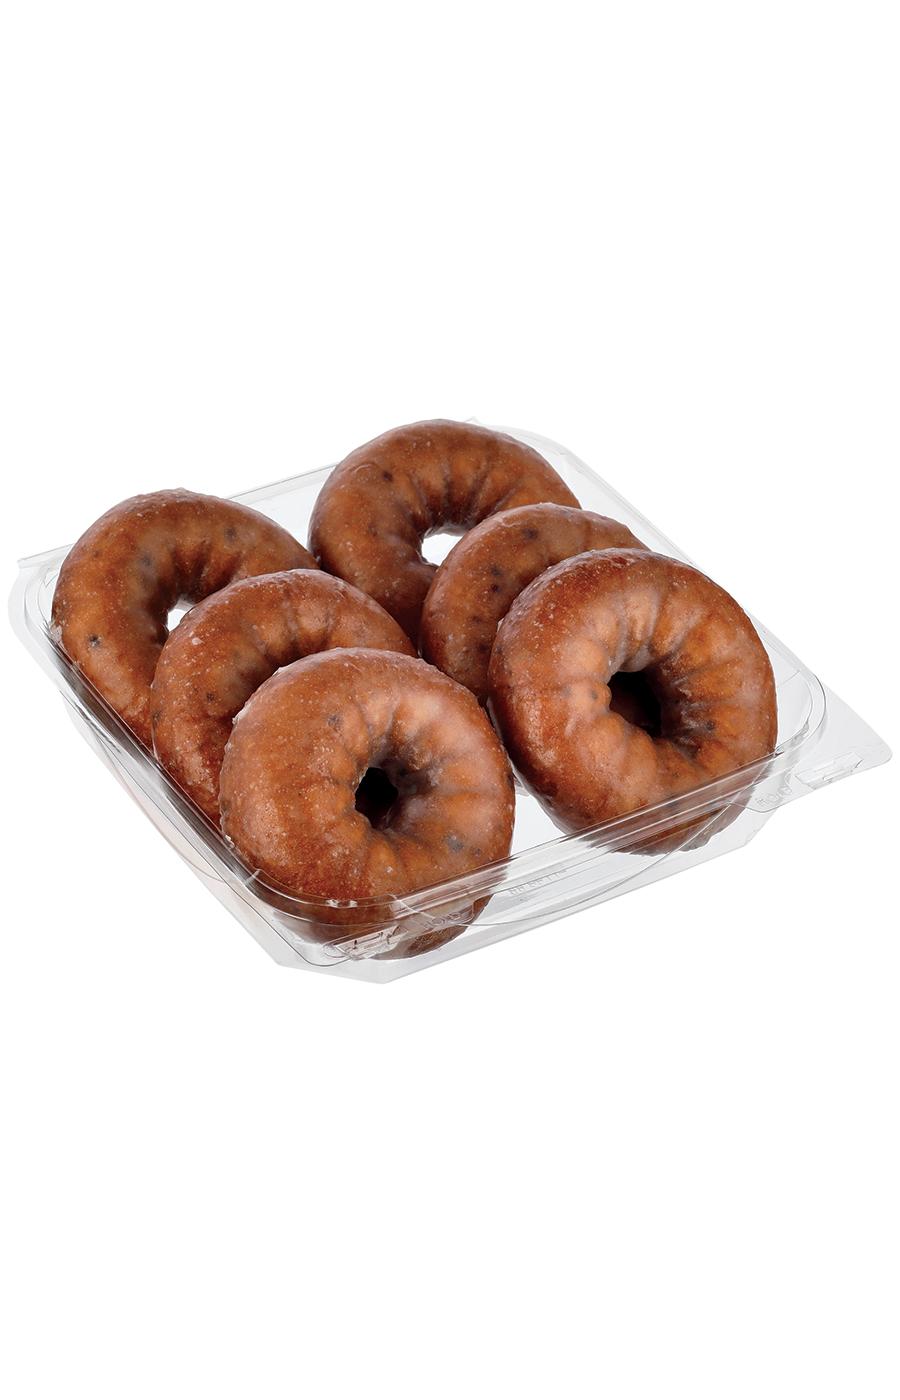 H-E-B Bakery Blueberry Flavored Glazed Cake Donuts; image 1 of 2